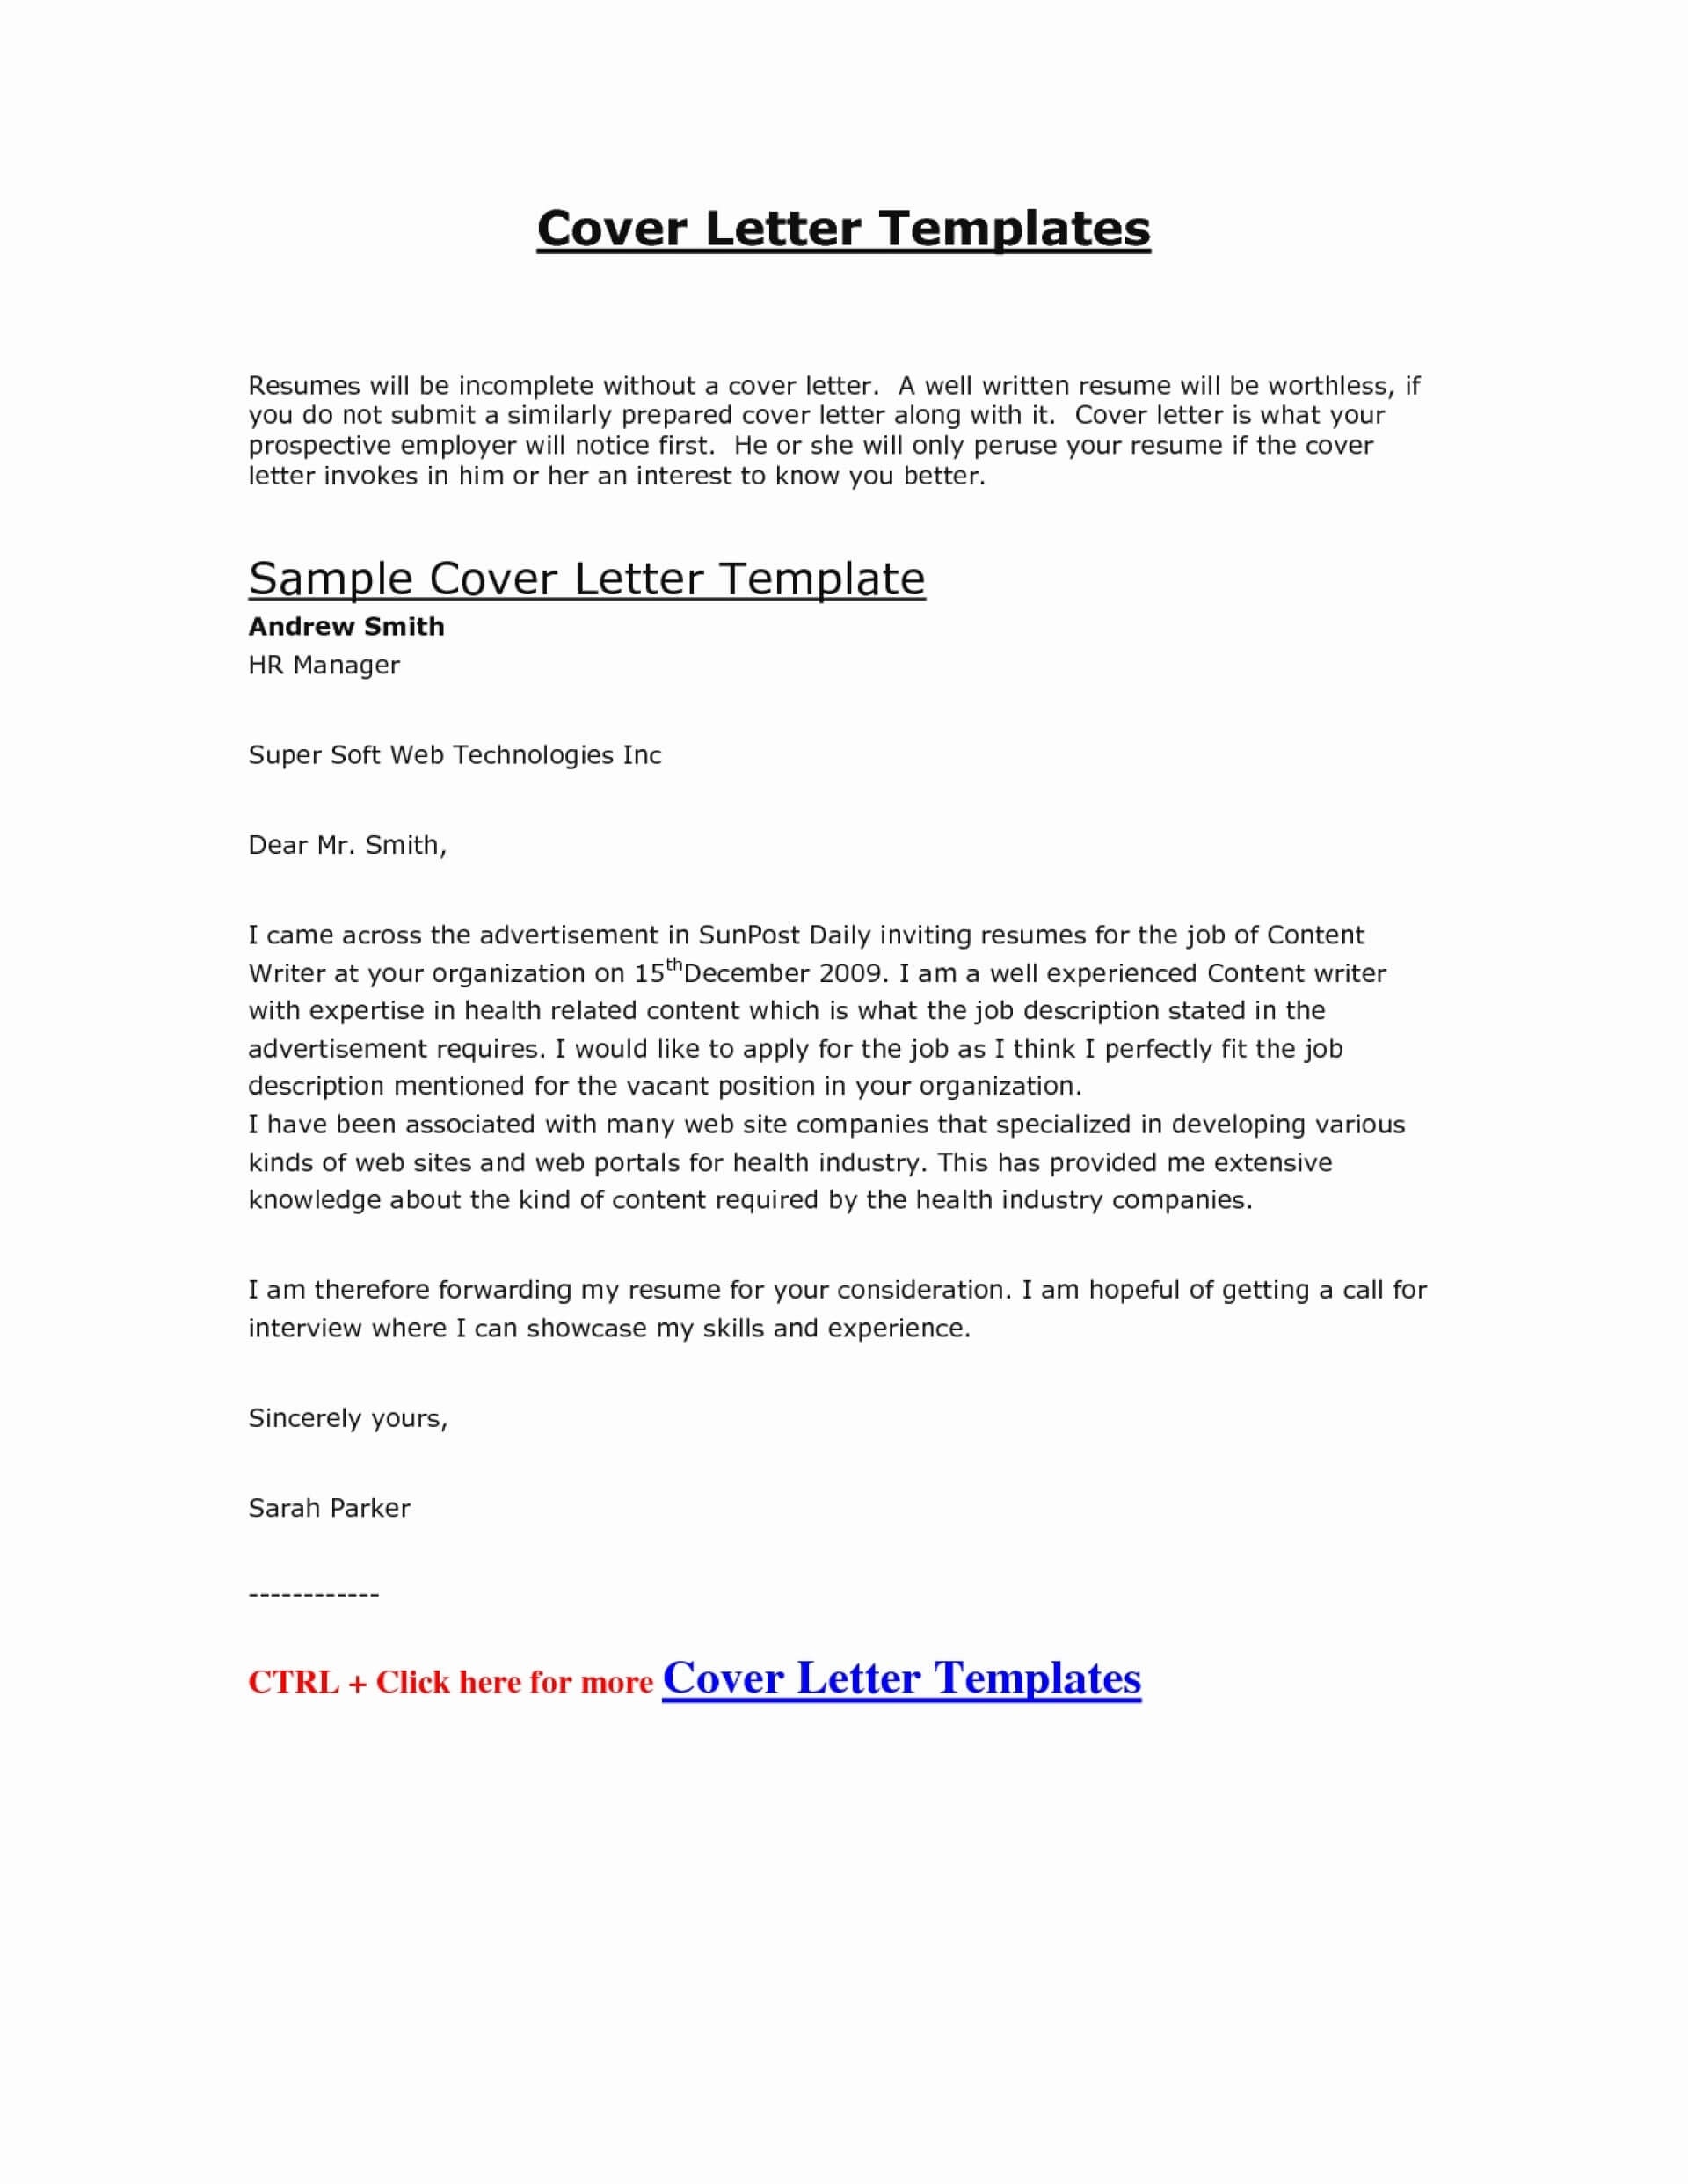 011 Letter Of Interest Template Microsoft Word Sweep11 Ideas Pertaining To Letter Of Interest Template Microsoft Word